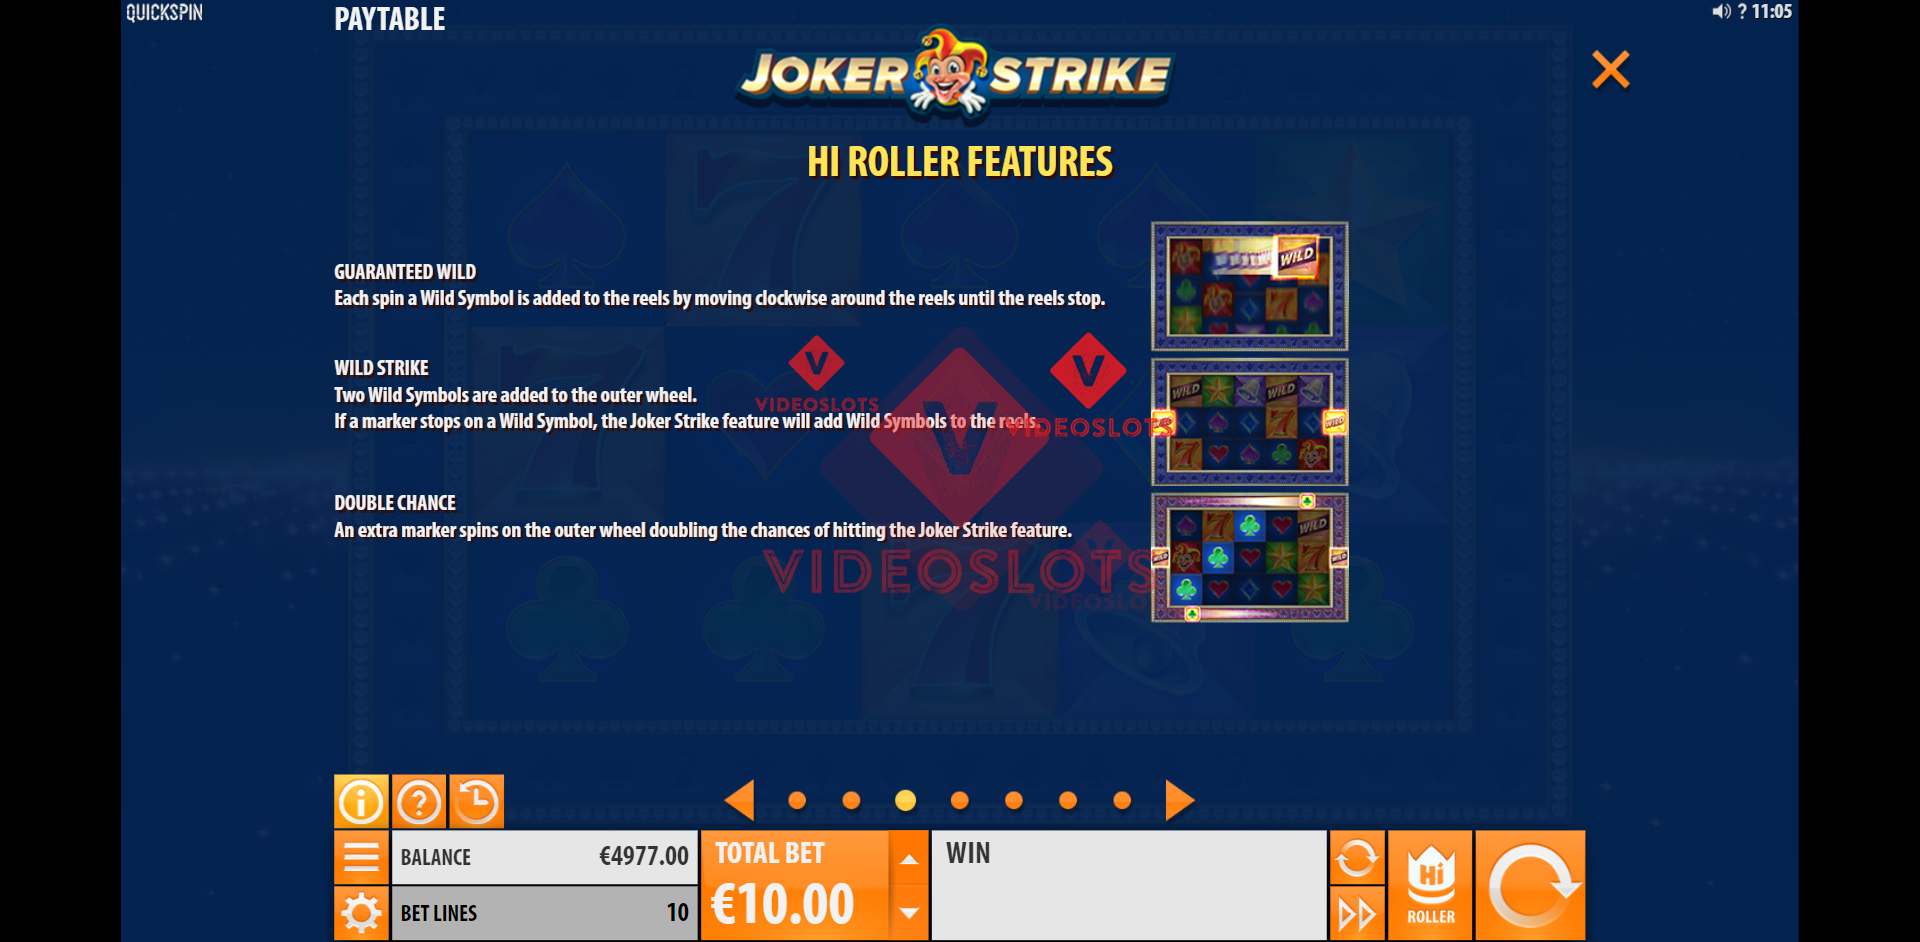 Pay Table and Game Info for Joker Strike slot from Quickspin